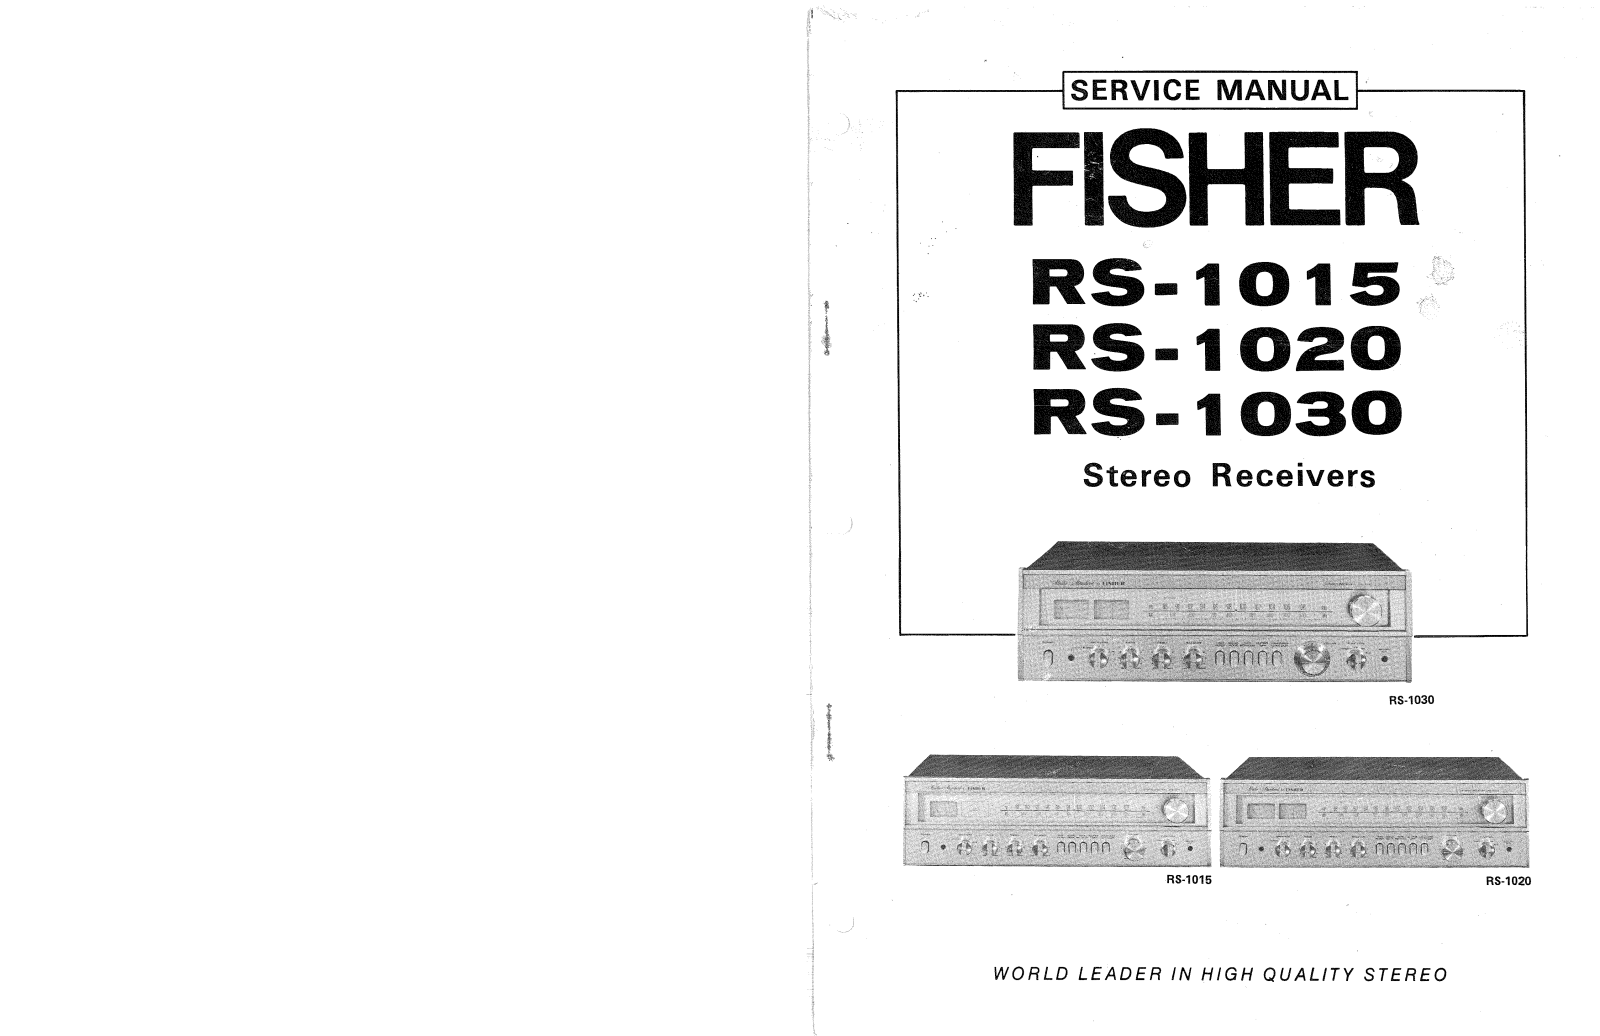 Fisher RS-1015, RS-1020, RS-1030 Service manual